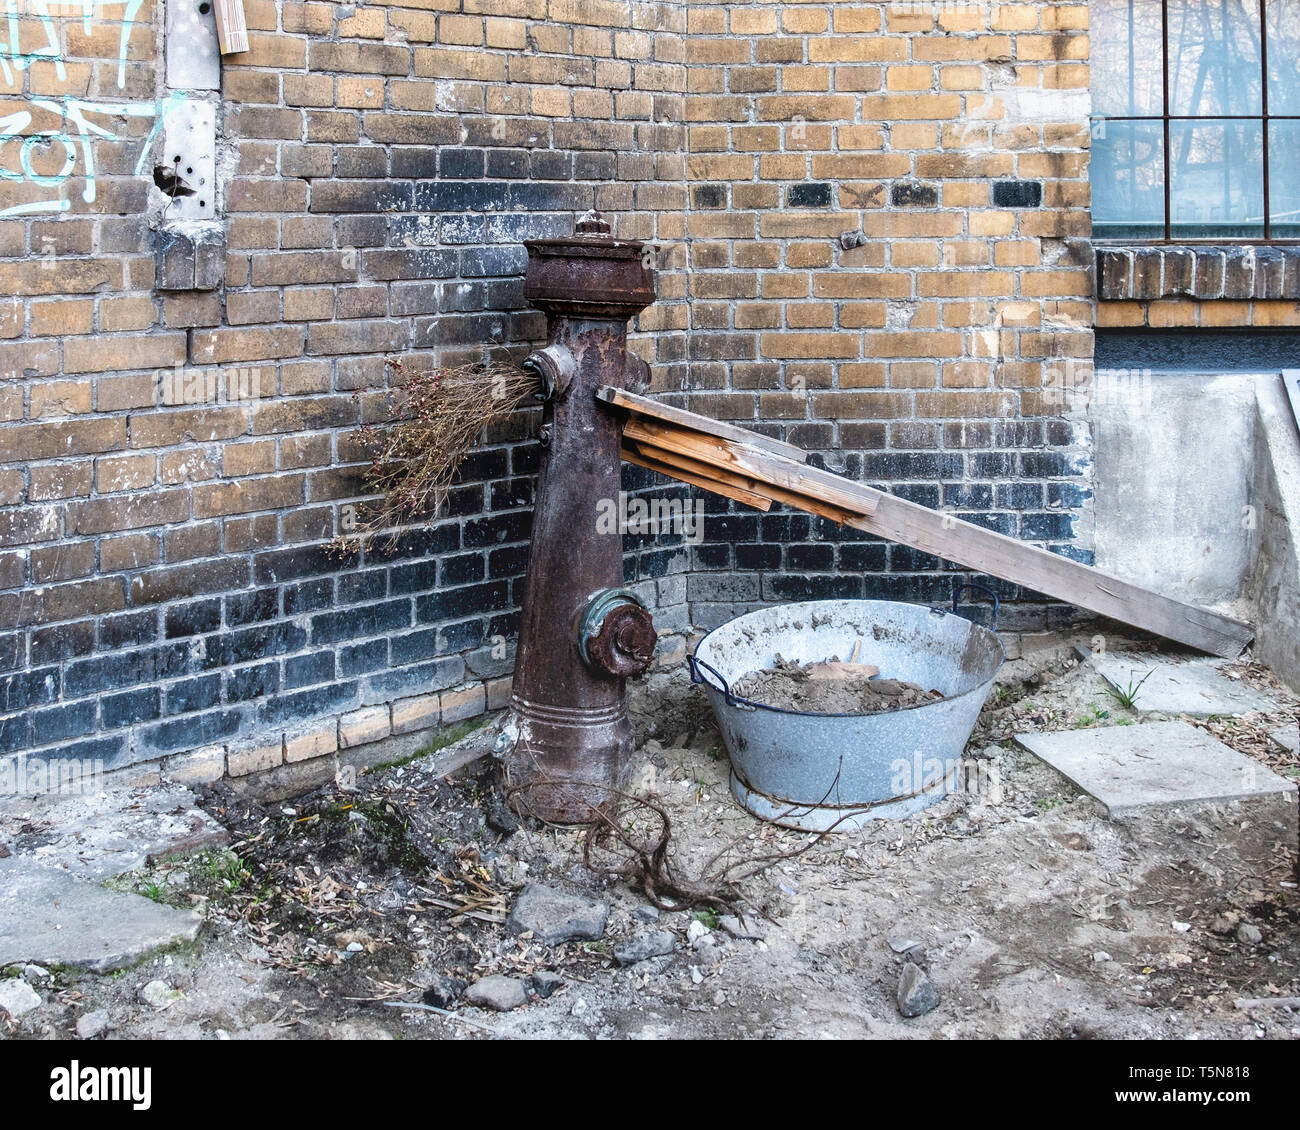 Wedding, Berlin. Old water pipe & container in Yard of dilapidated old industrial building next to Panke river at Gerichtstrasse 23. Stock Photo